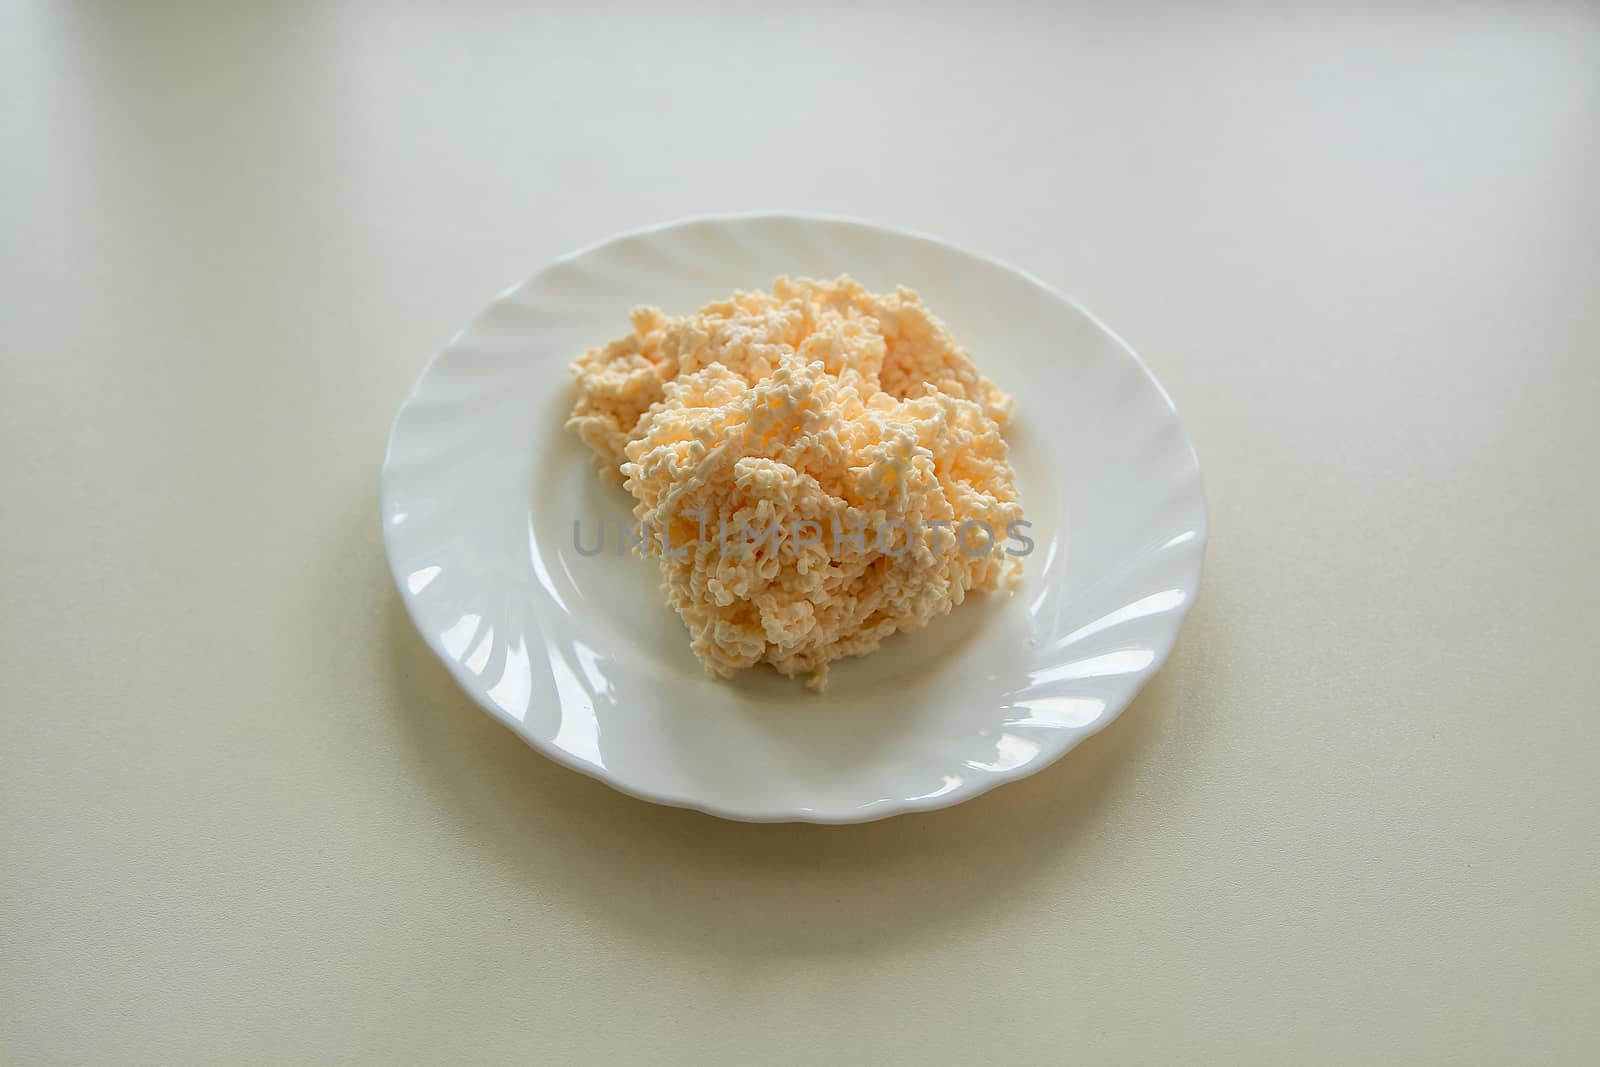 Shredded Cream Cheese on a white plate on a light background in daylight. Grated melted cheese.